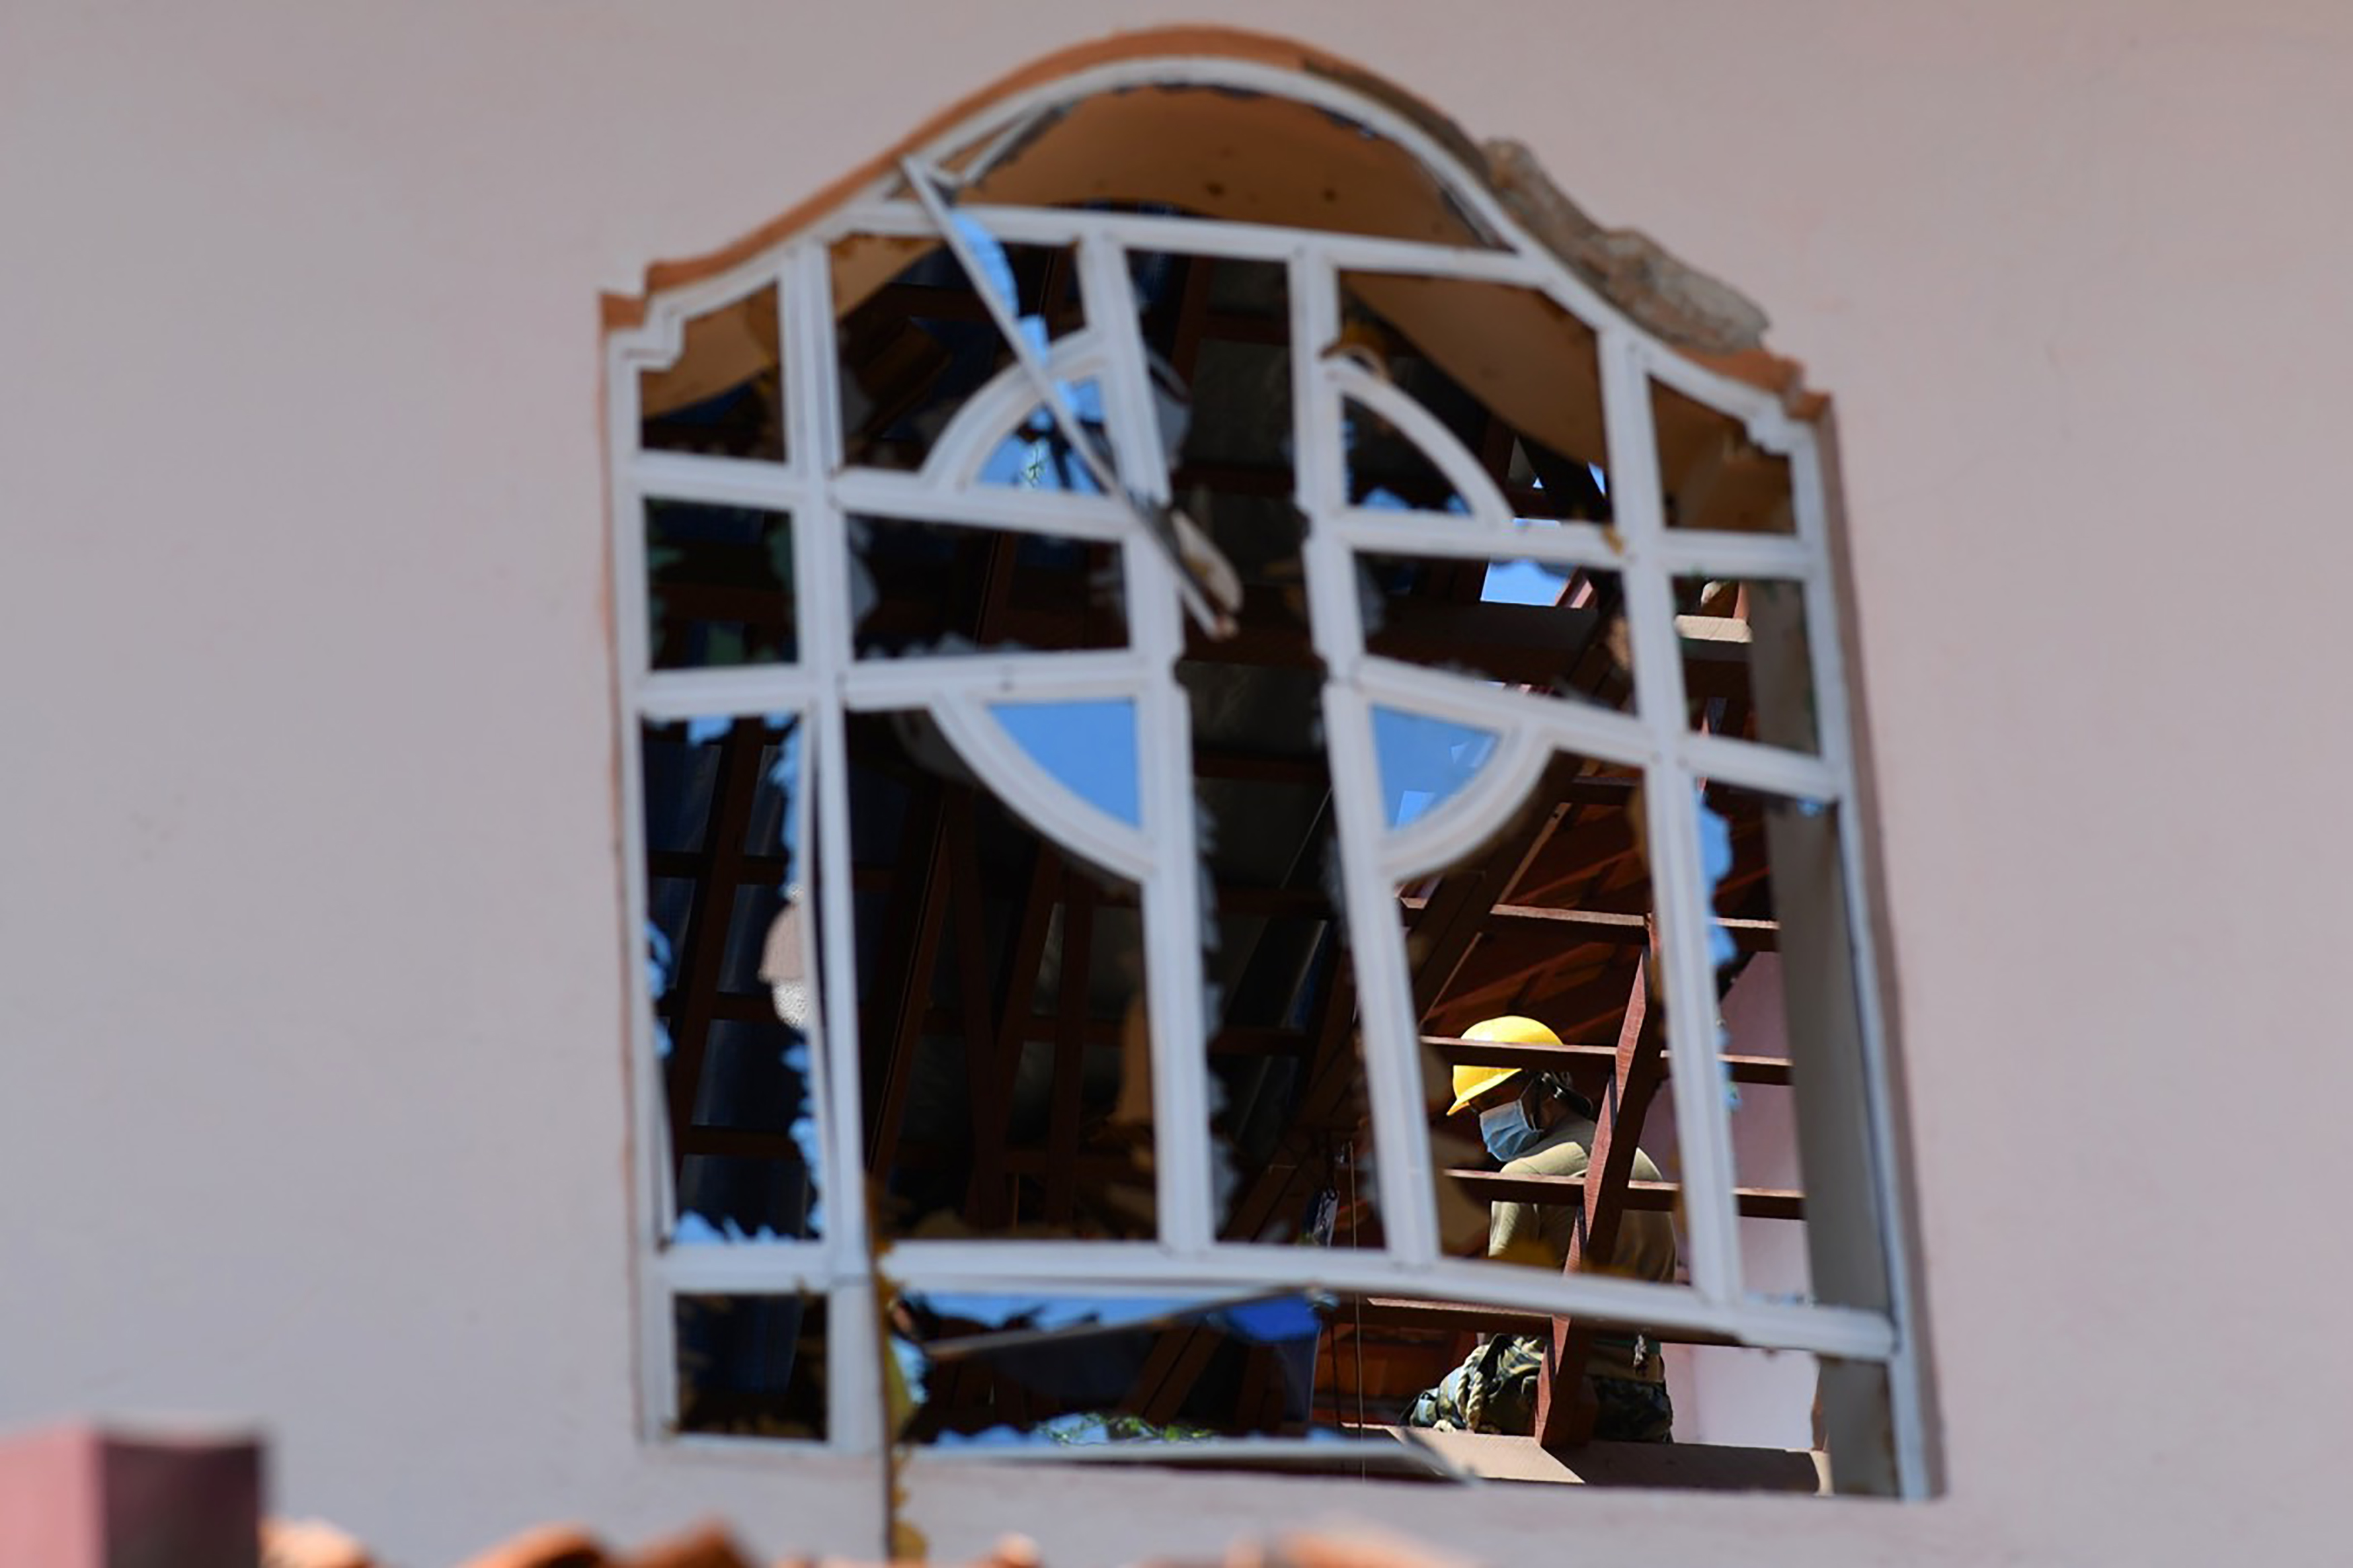 A worker clears debris from the roof of St. Sebastian's Church in Negombo on April 22, 2019, a day after the church was hit in a series of bomb blasts targeting churches and luxury hotels in Sri Lanka.